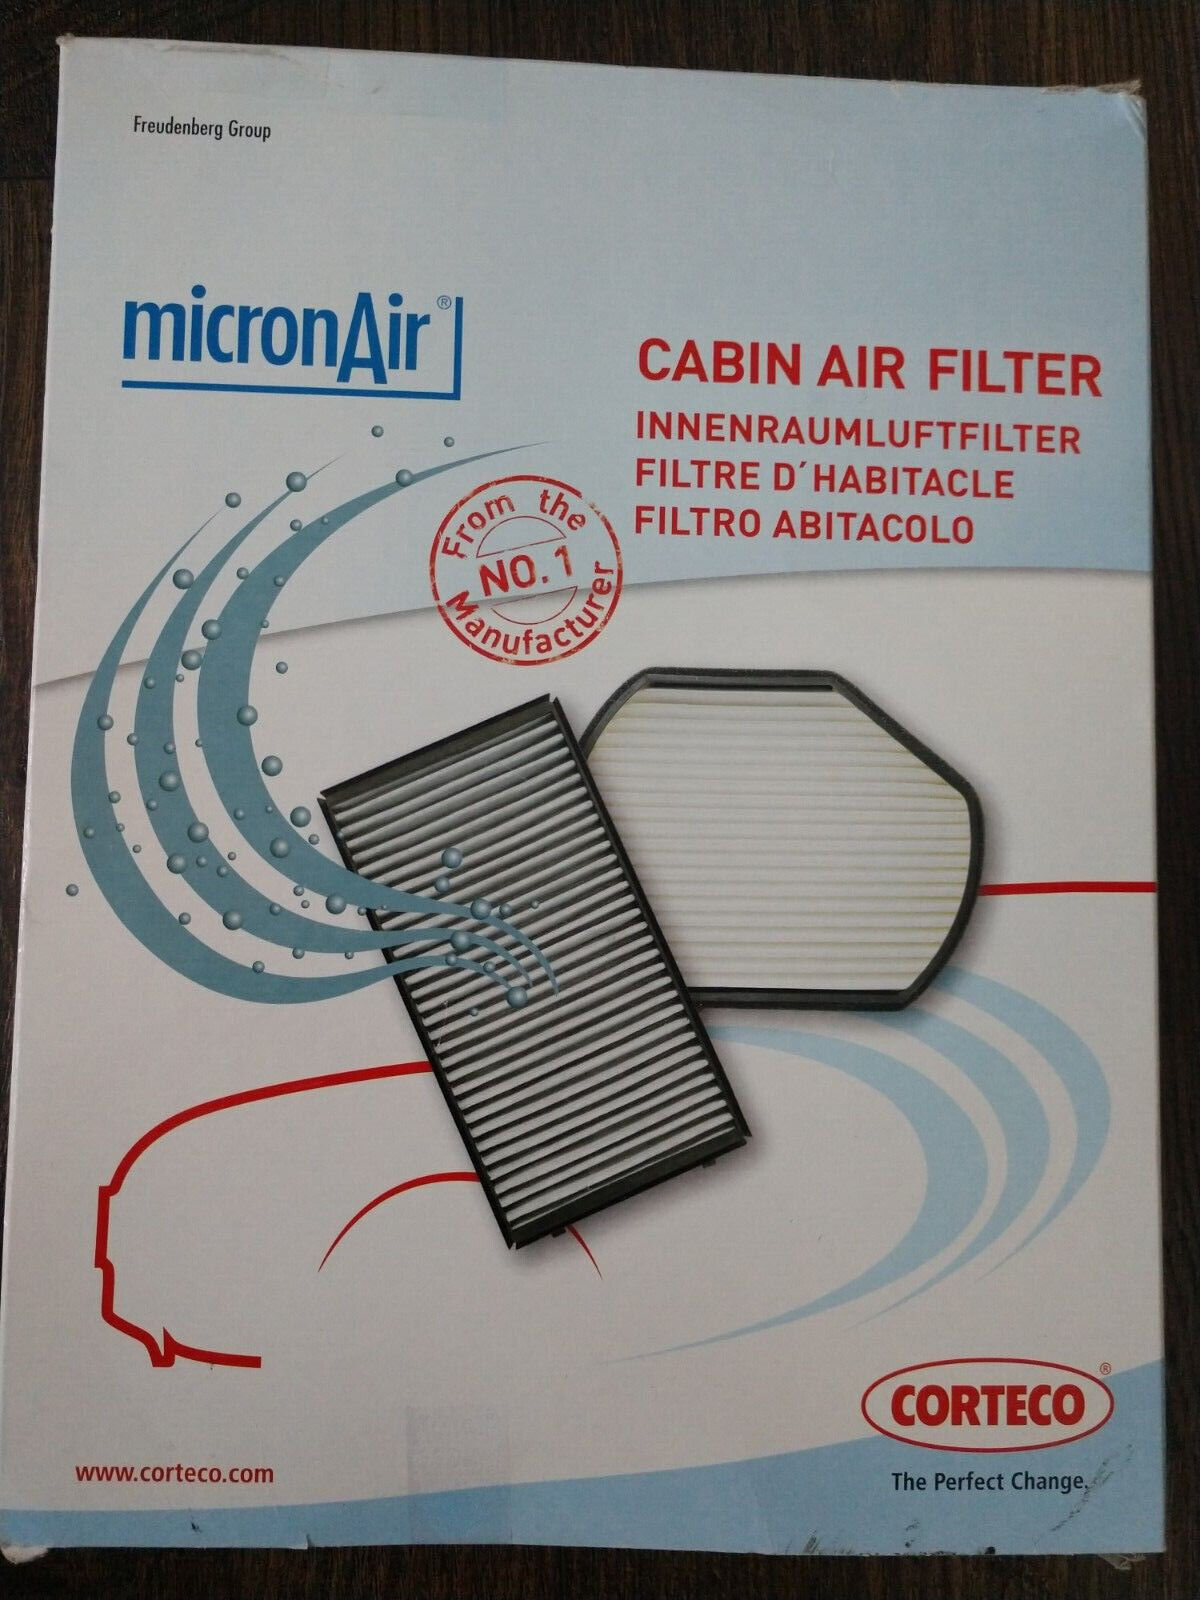 Set of 2 Cabin Air Filter CORTECO Microair OEM For Mercedes W210 W215 W220